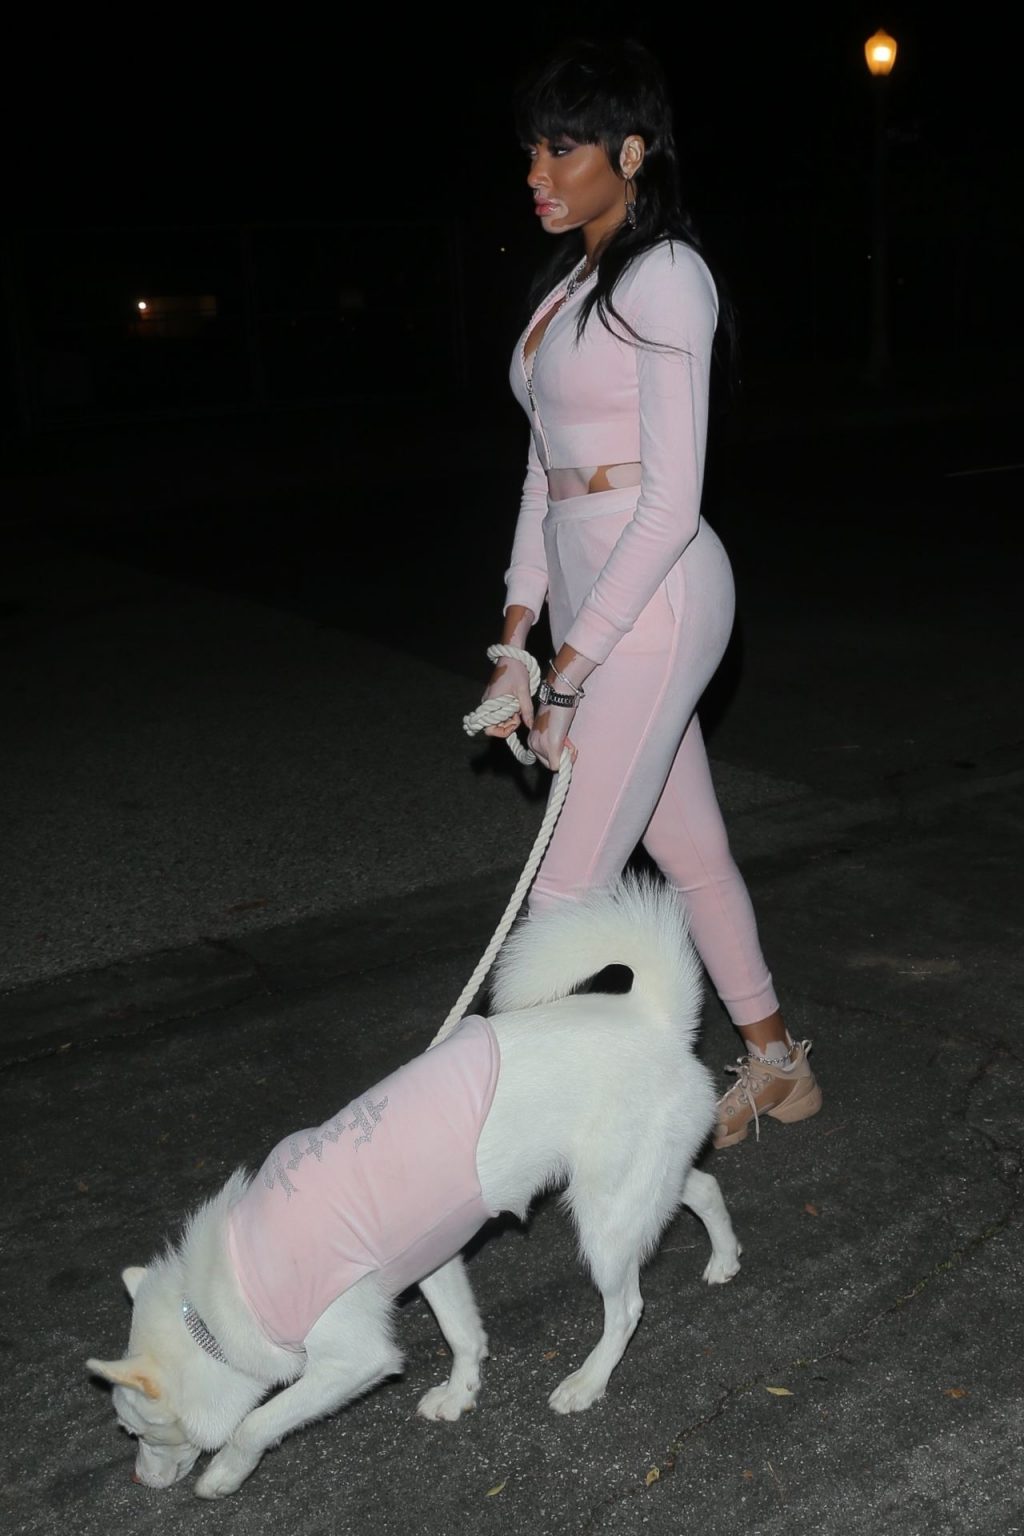 Unusual Canadian Supermodel and Her Dog Look Pretty in Pink (41 Photos)